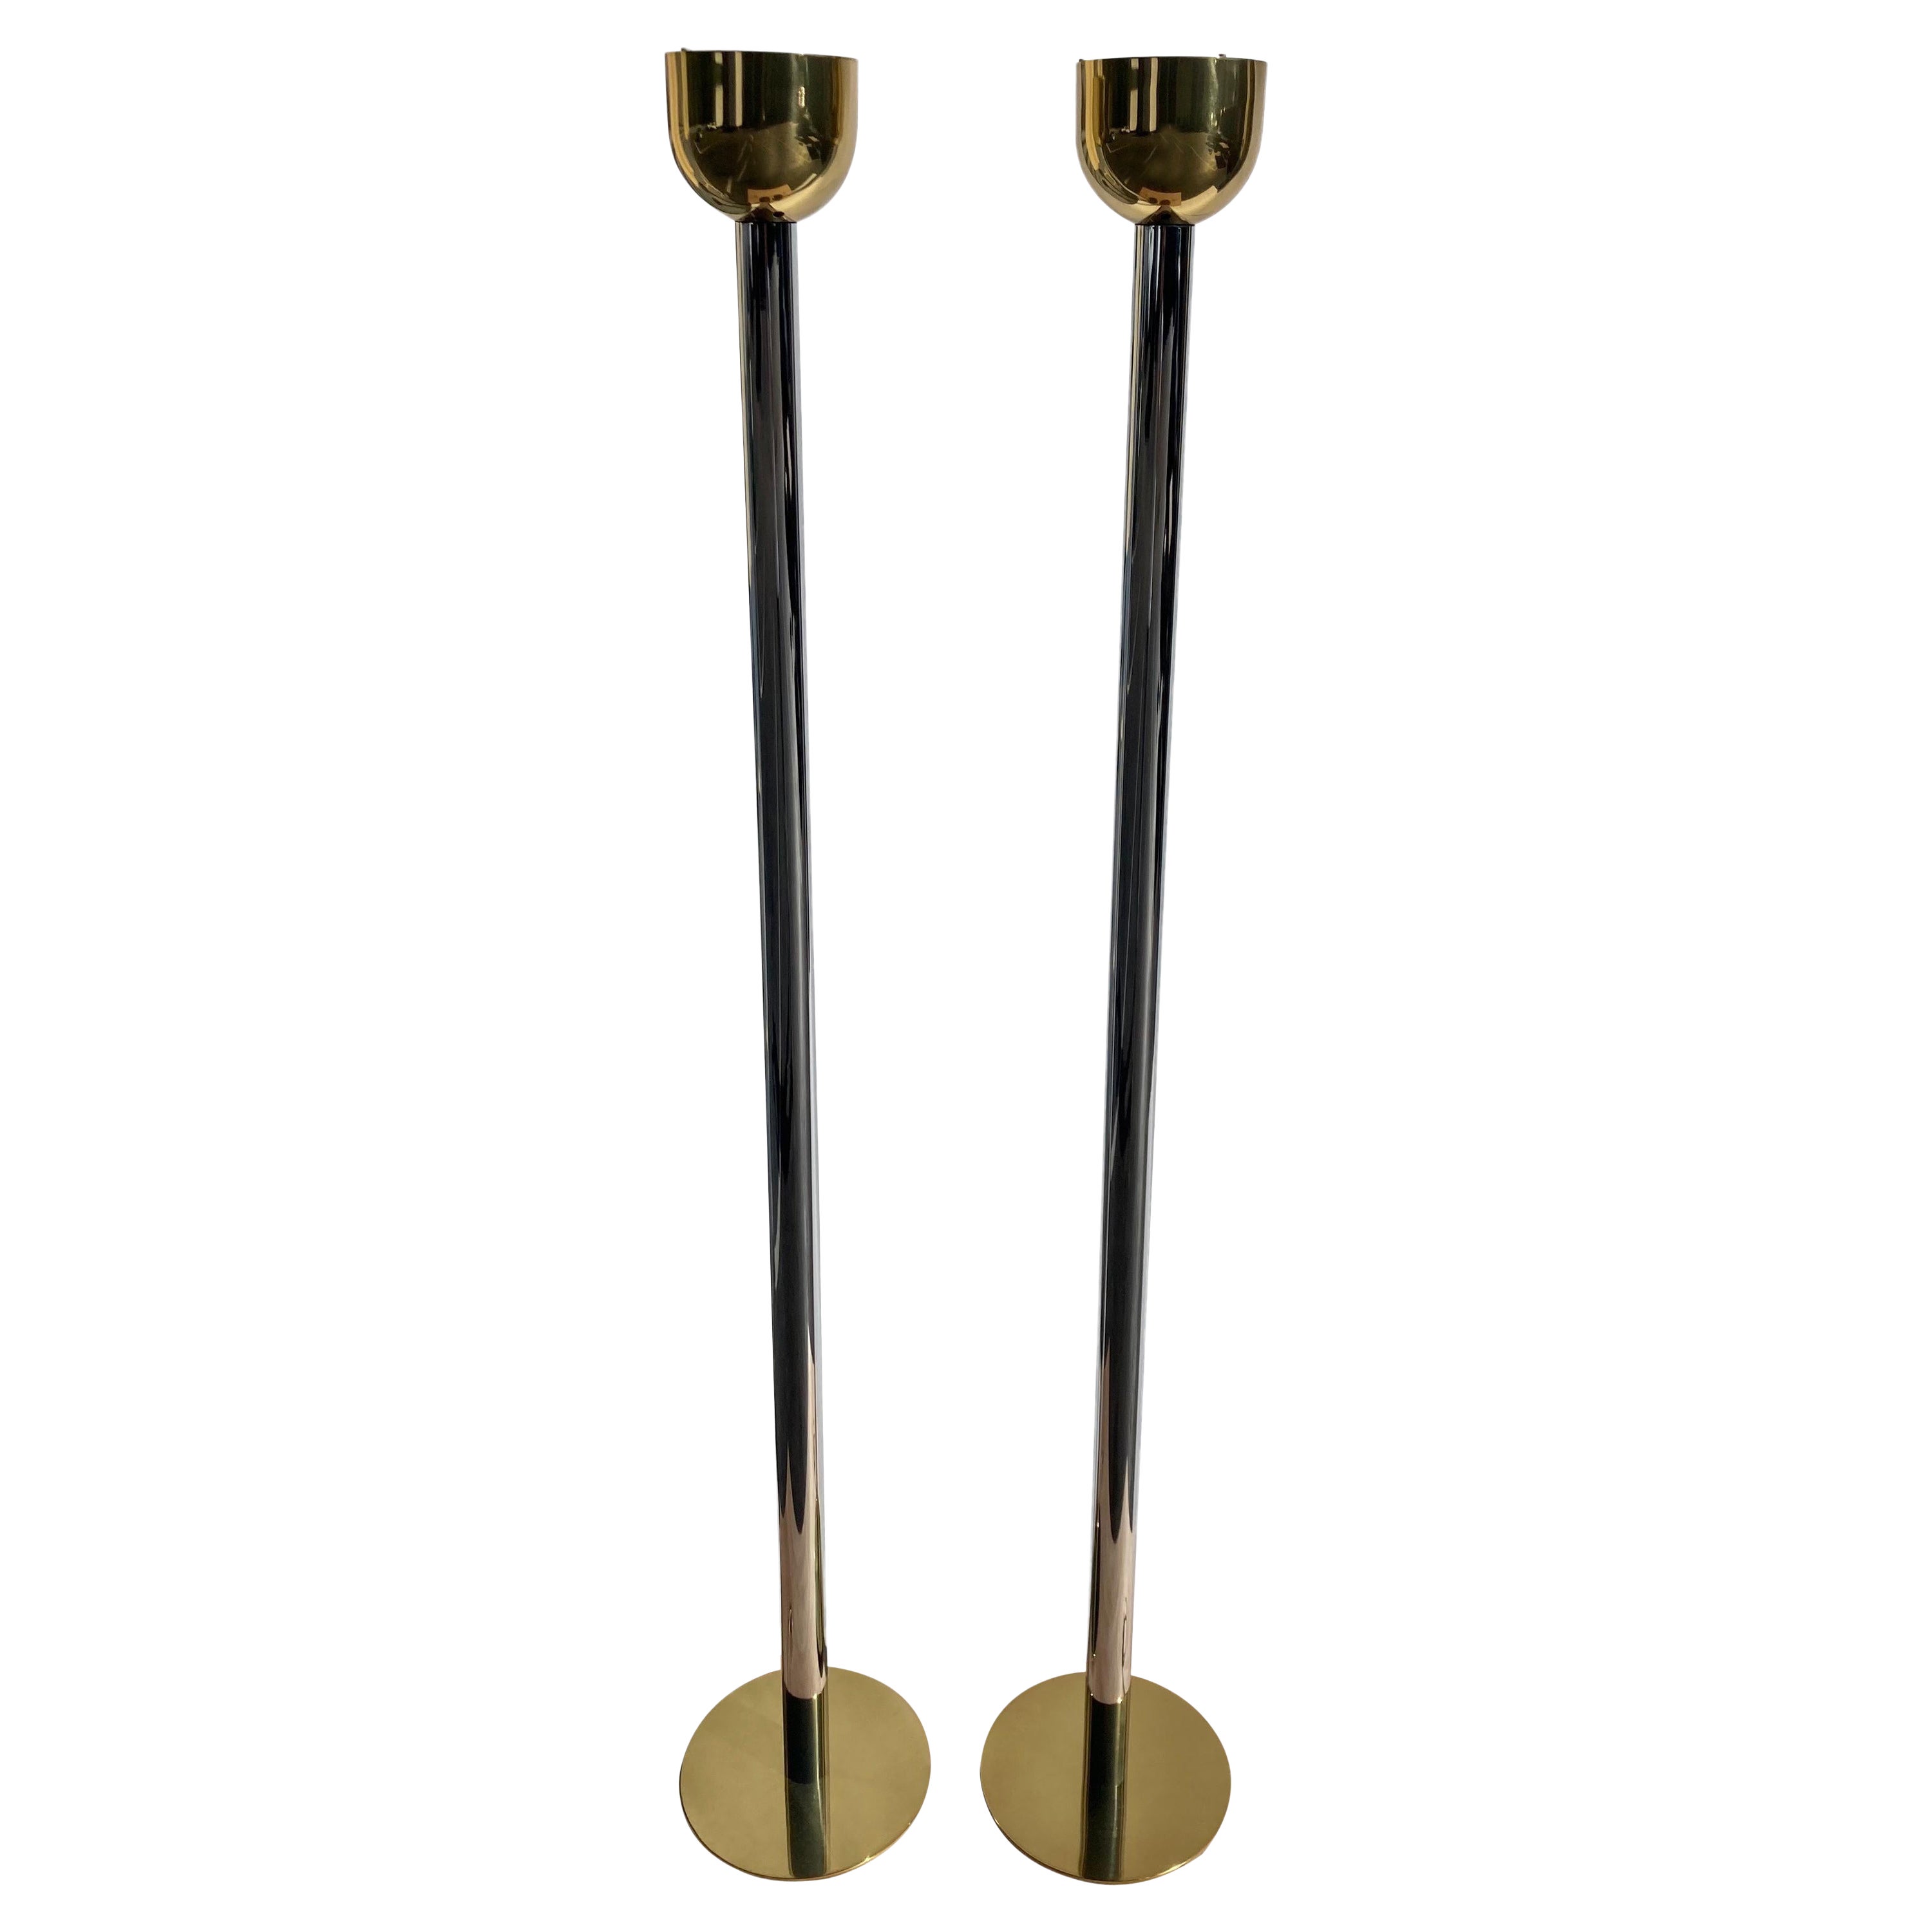 Stunning Italian Floor Lamps, Torchiere, Brass and Chrome, Italy, 1970s For Sale